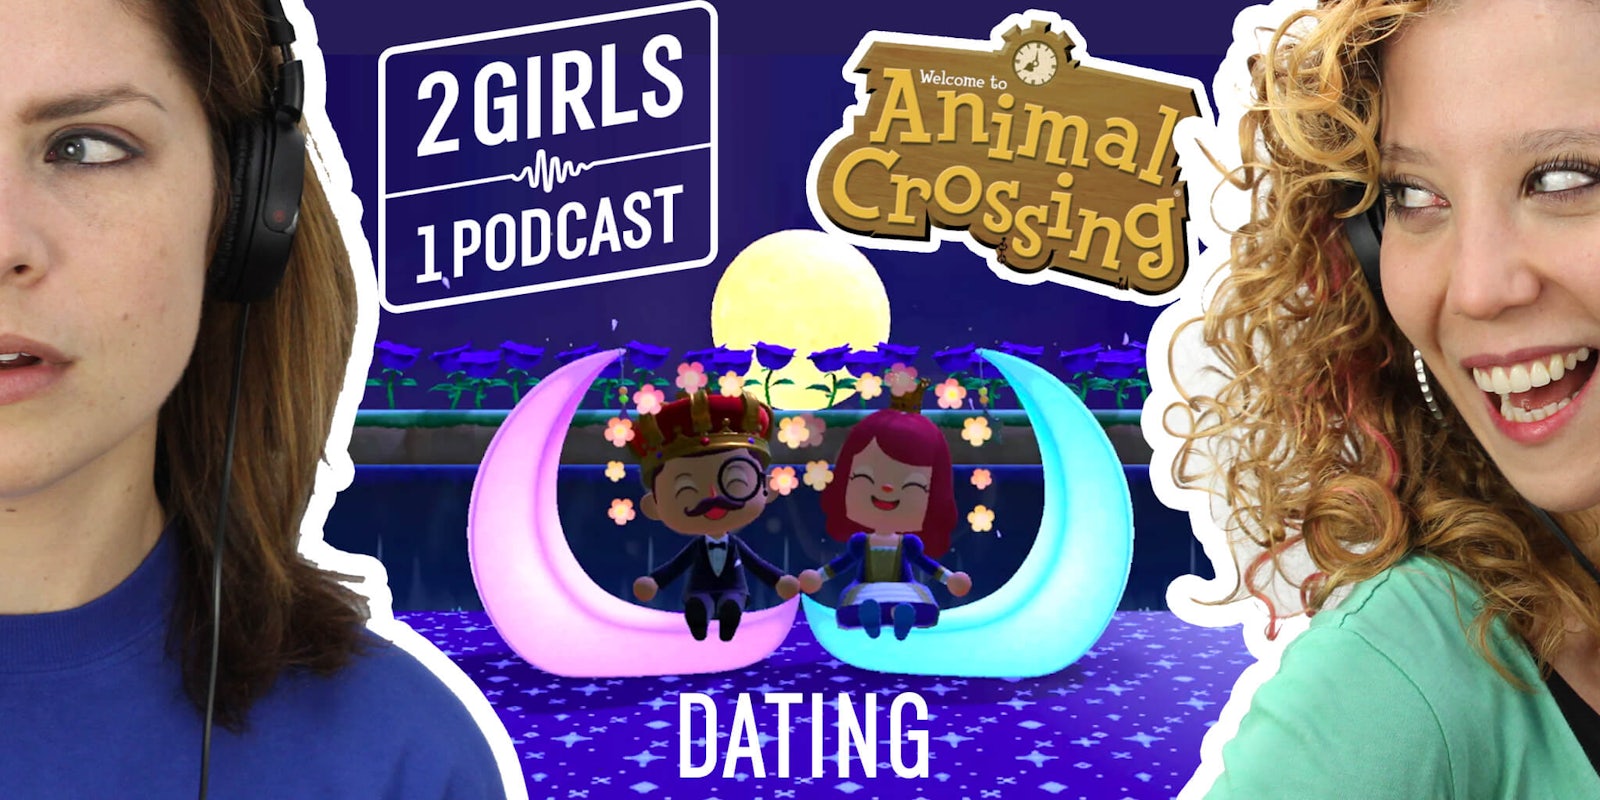 2 Girls 1 Podcast picture of them discussing ANIMAL CROSSING DATING